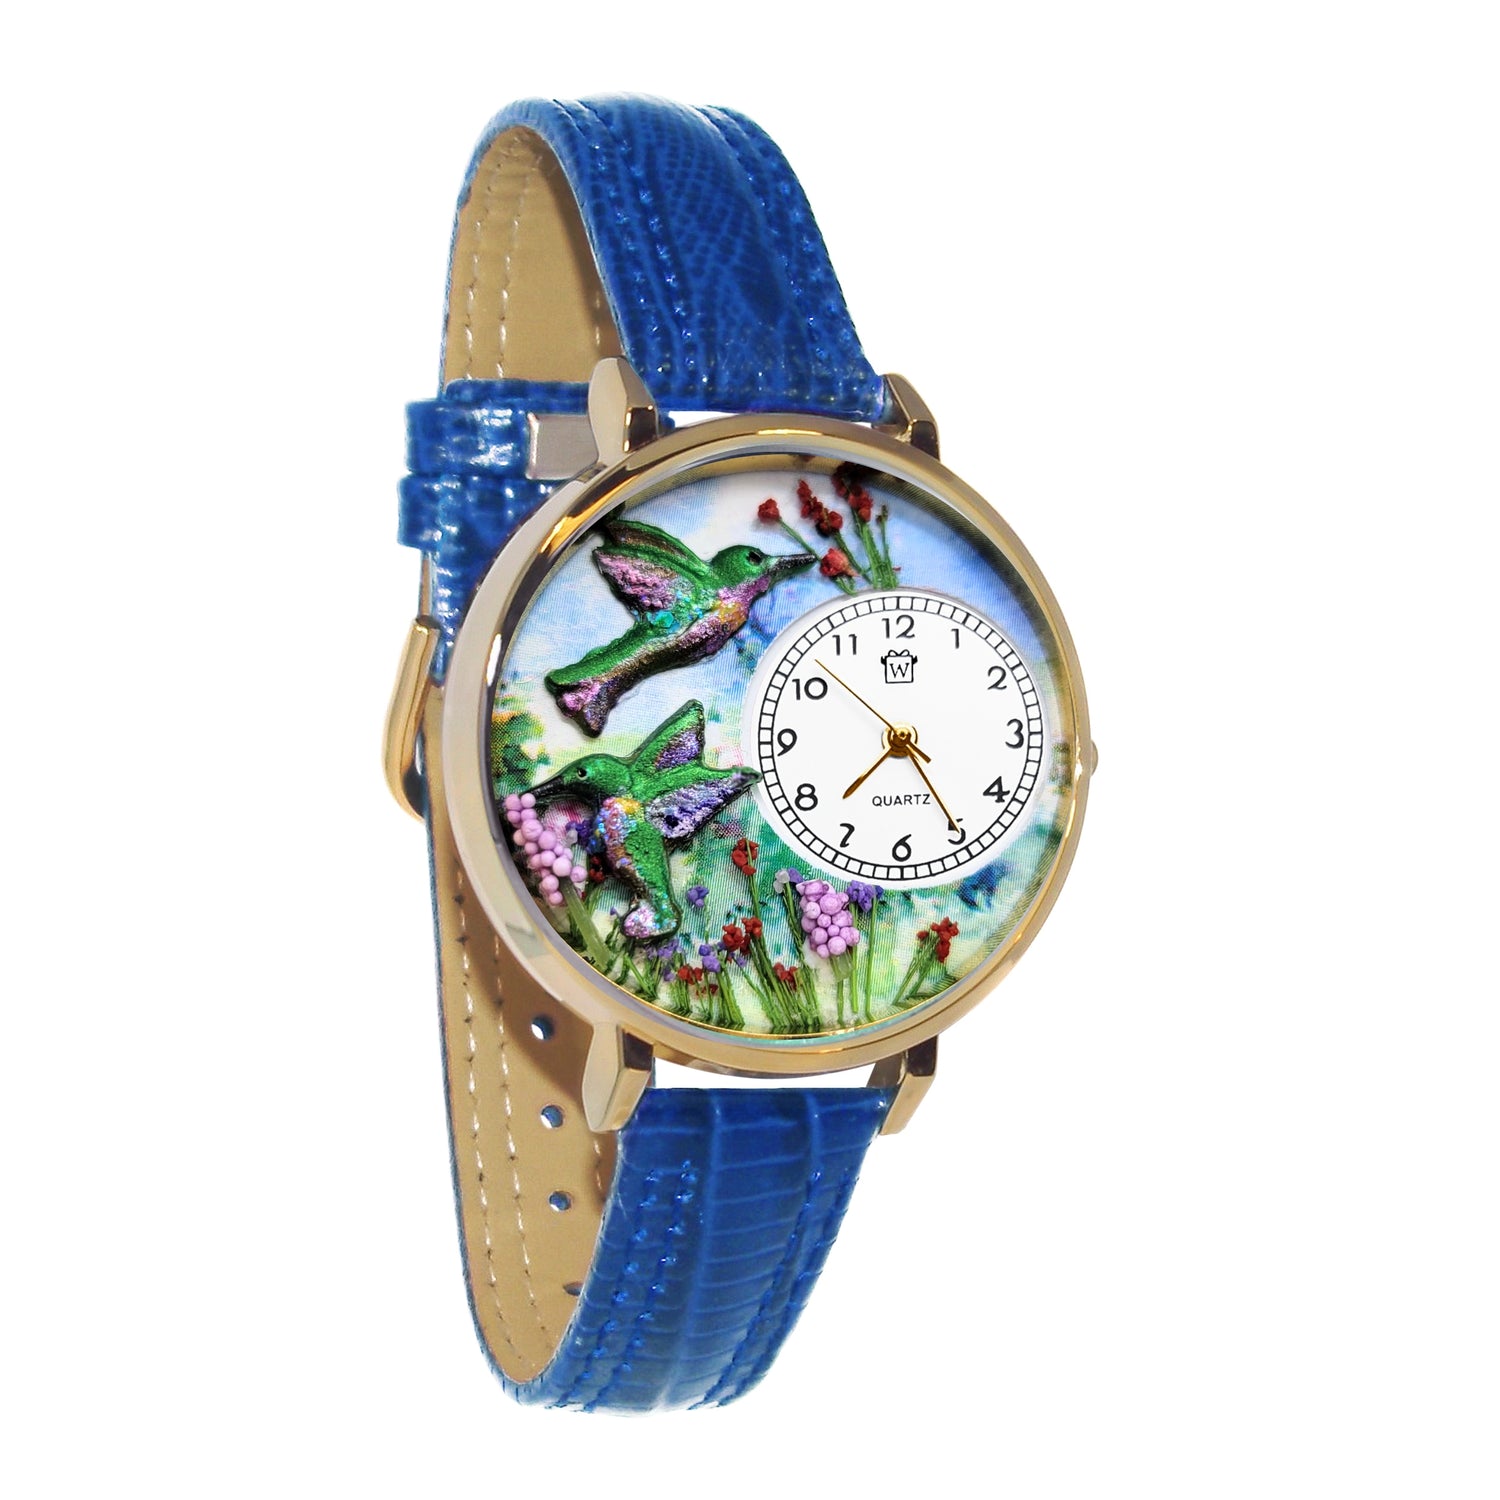 Whimsical Gifts | Hummingbirds 3D Watch Large Style | Handmade in USA | Animal Lover | Outdoor & Garden | Novelty Unique Fun Miniatures Gift | Gold Finish Royal Blue Leather Watch Band